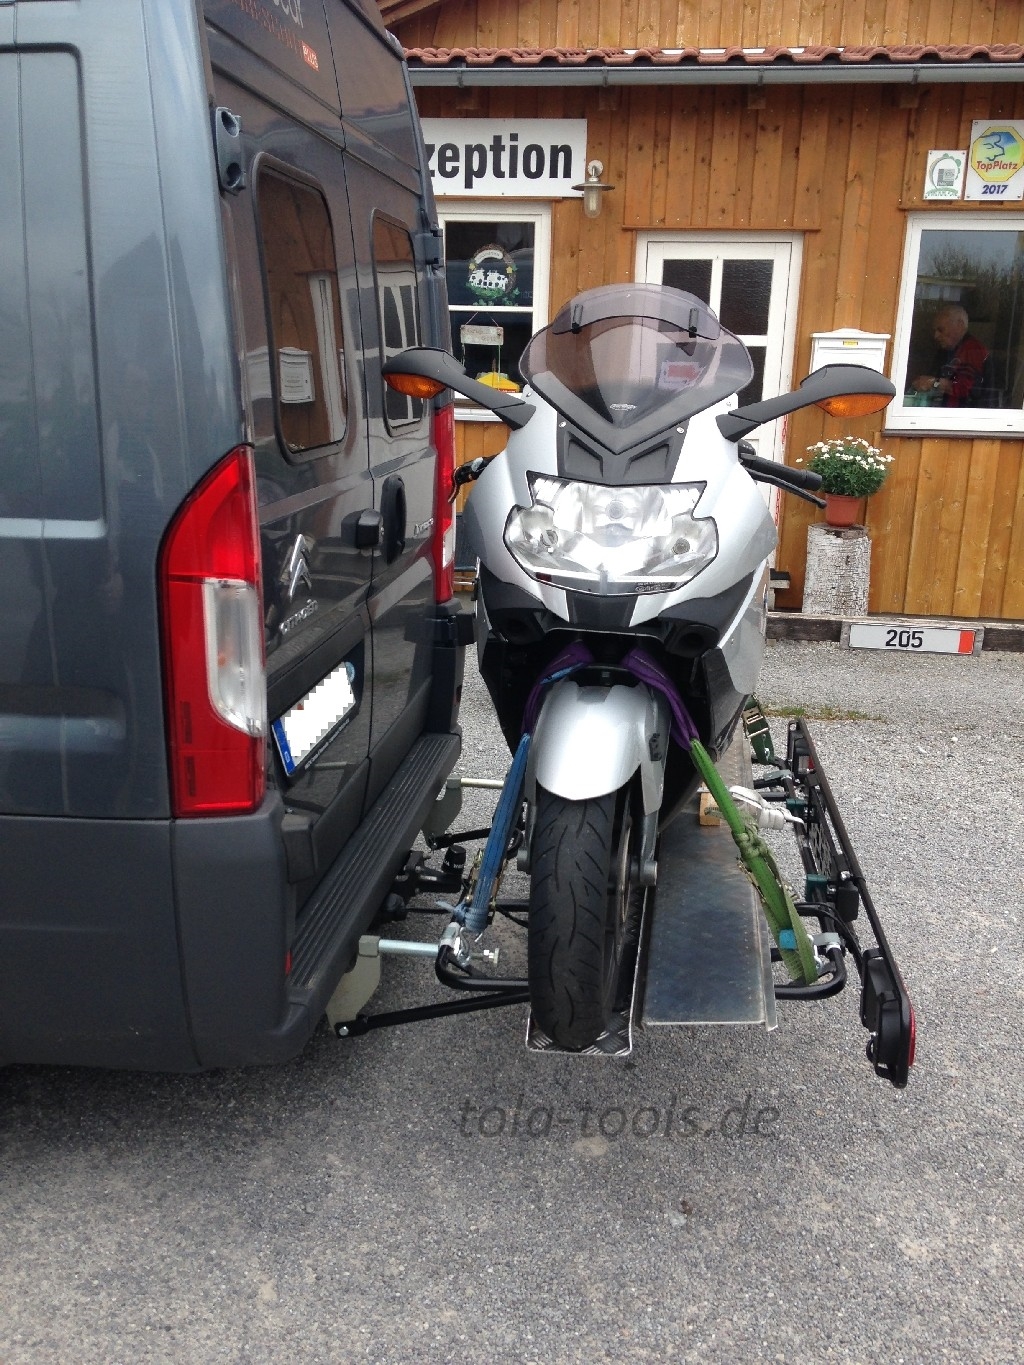 Cate Carrier for Motorcycles on Citroen Jumper